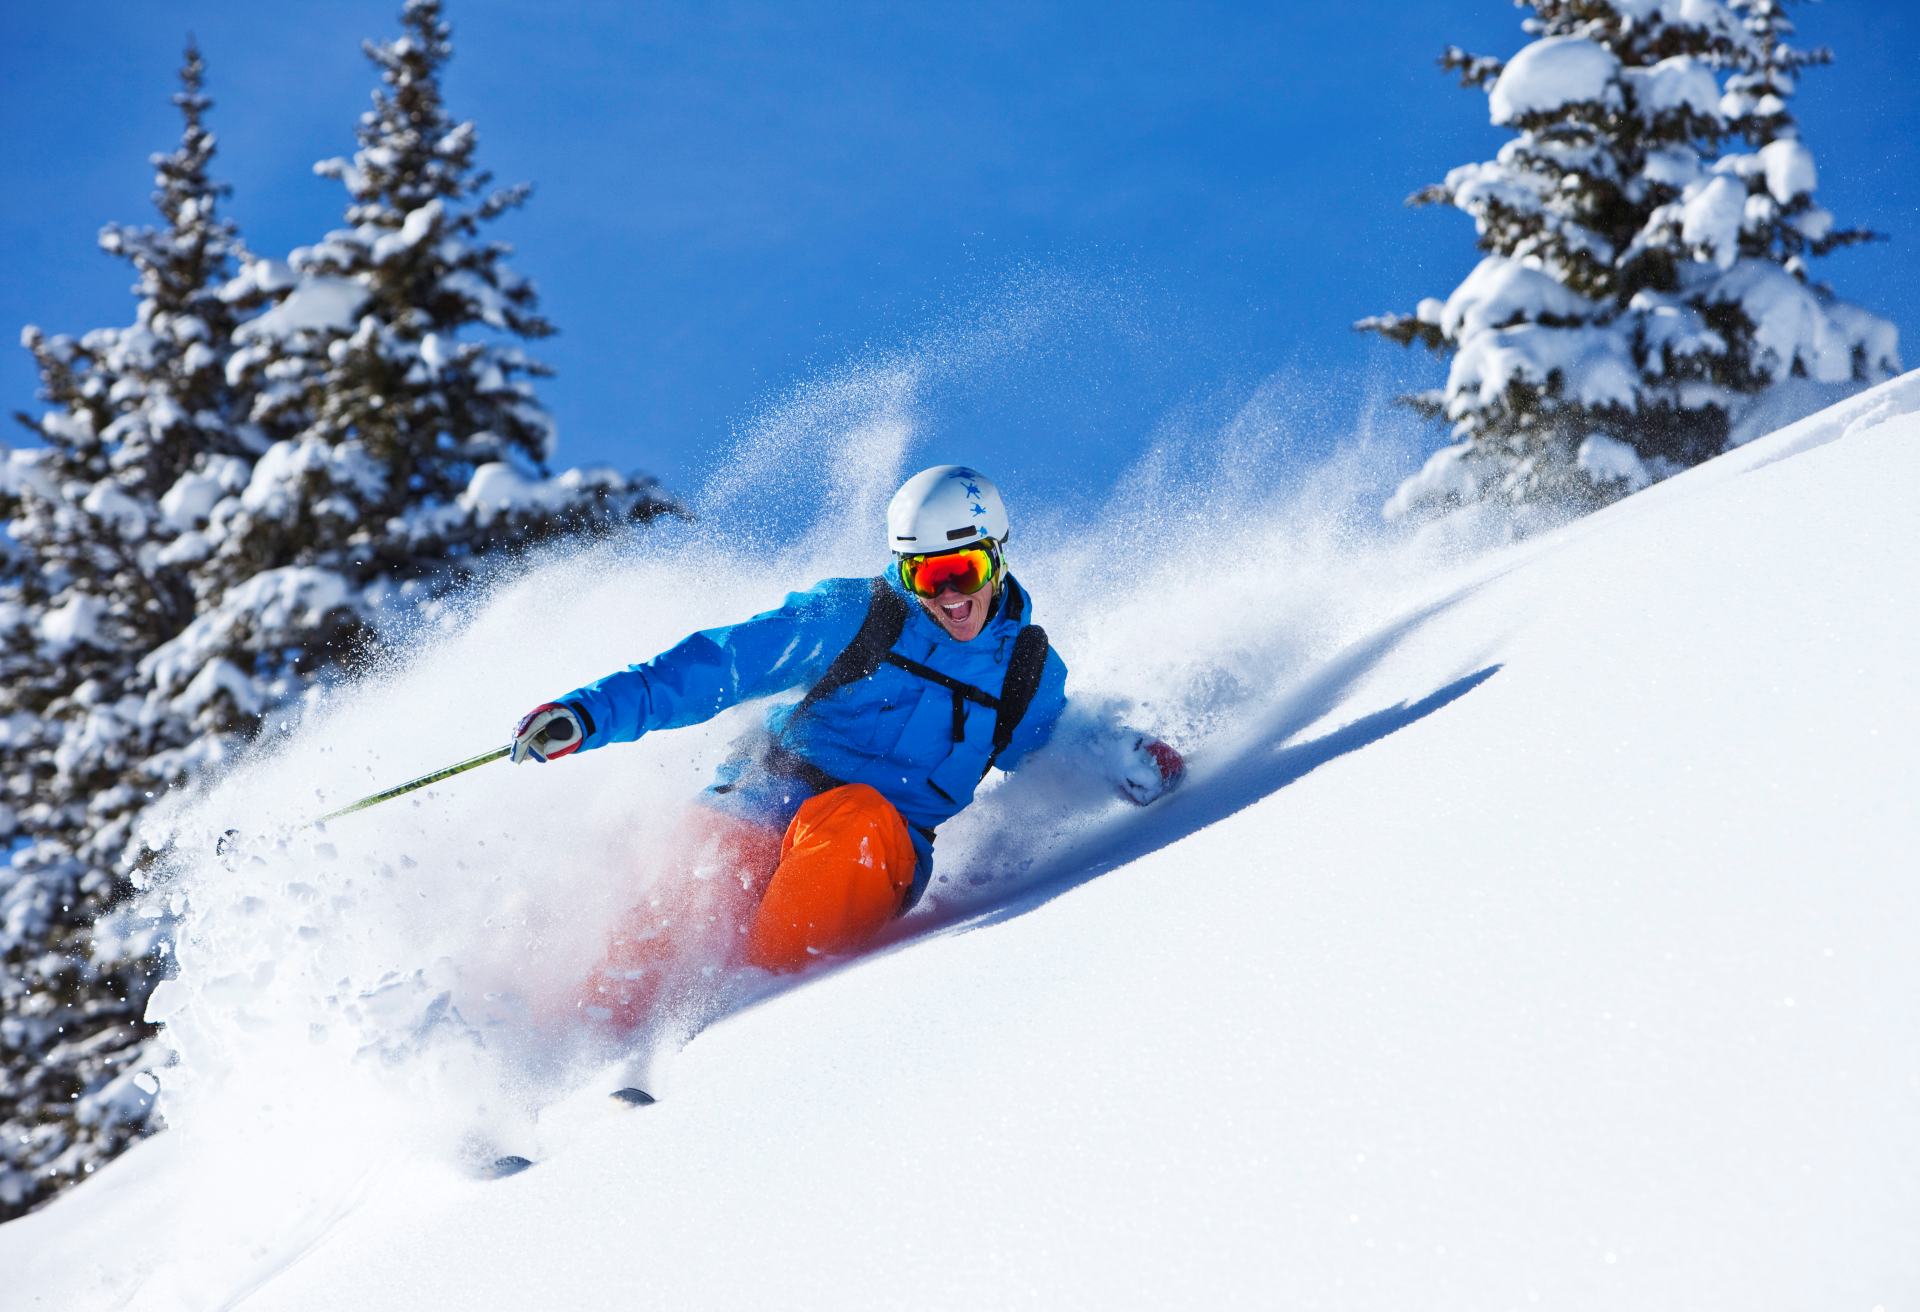 A athletic skier smiling rips fresh powder turns in the backcountry on a sunny day in Colorado.